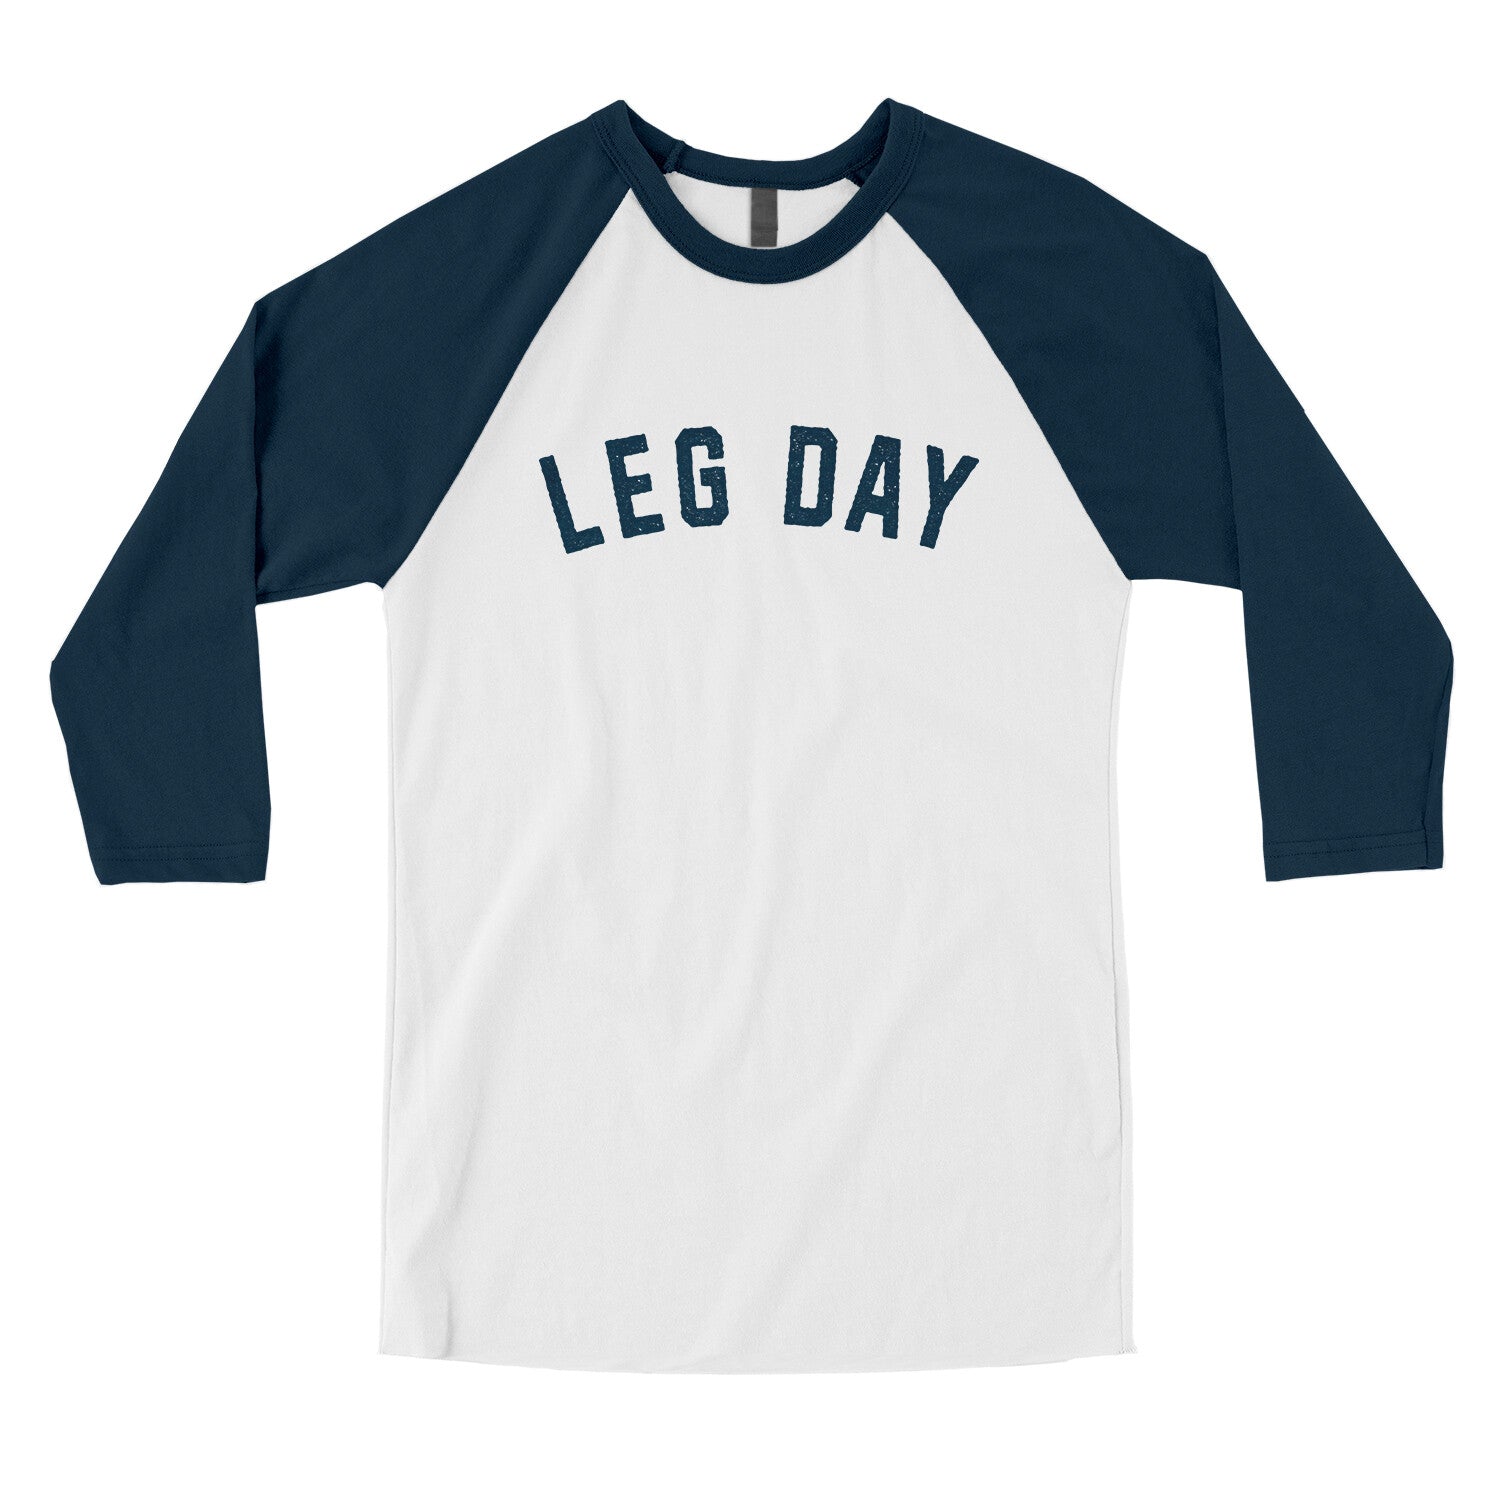 Leg Day in White with Navy Color